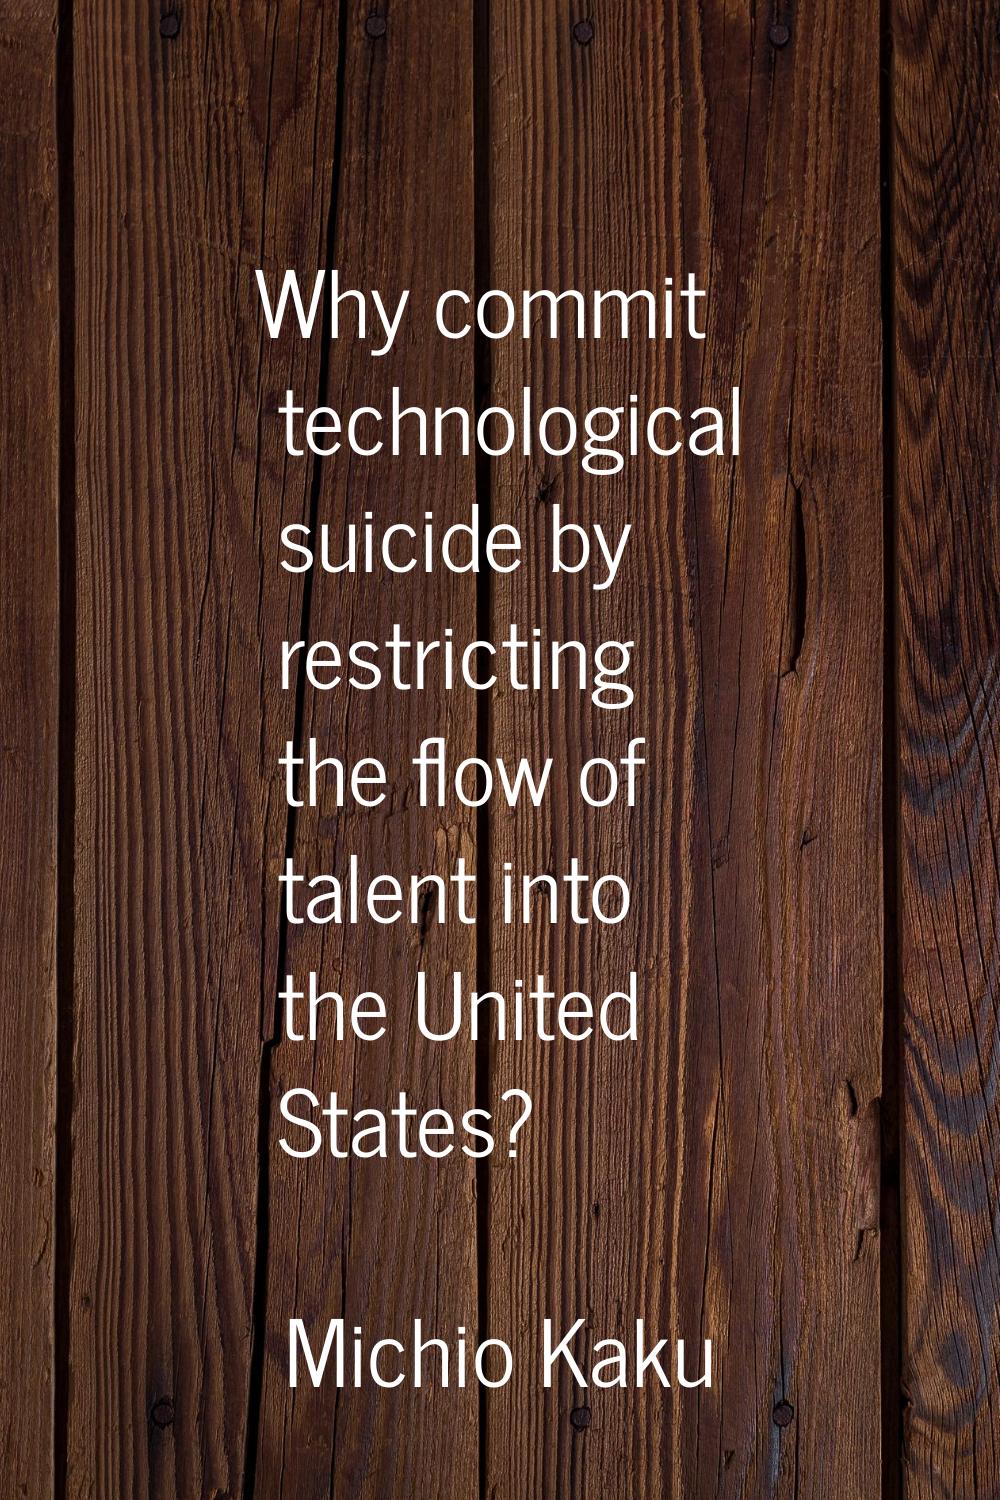 Why commit technological suicide by restricting the flow of talent into the United States?